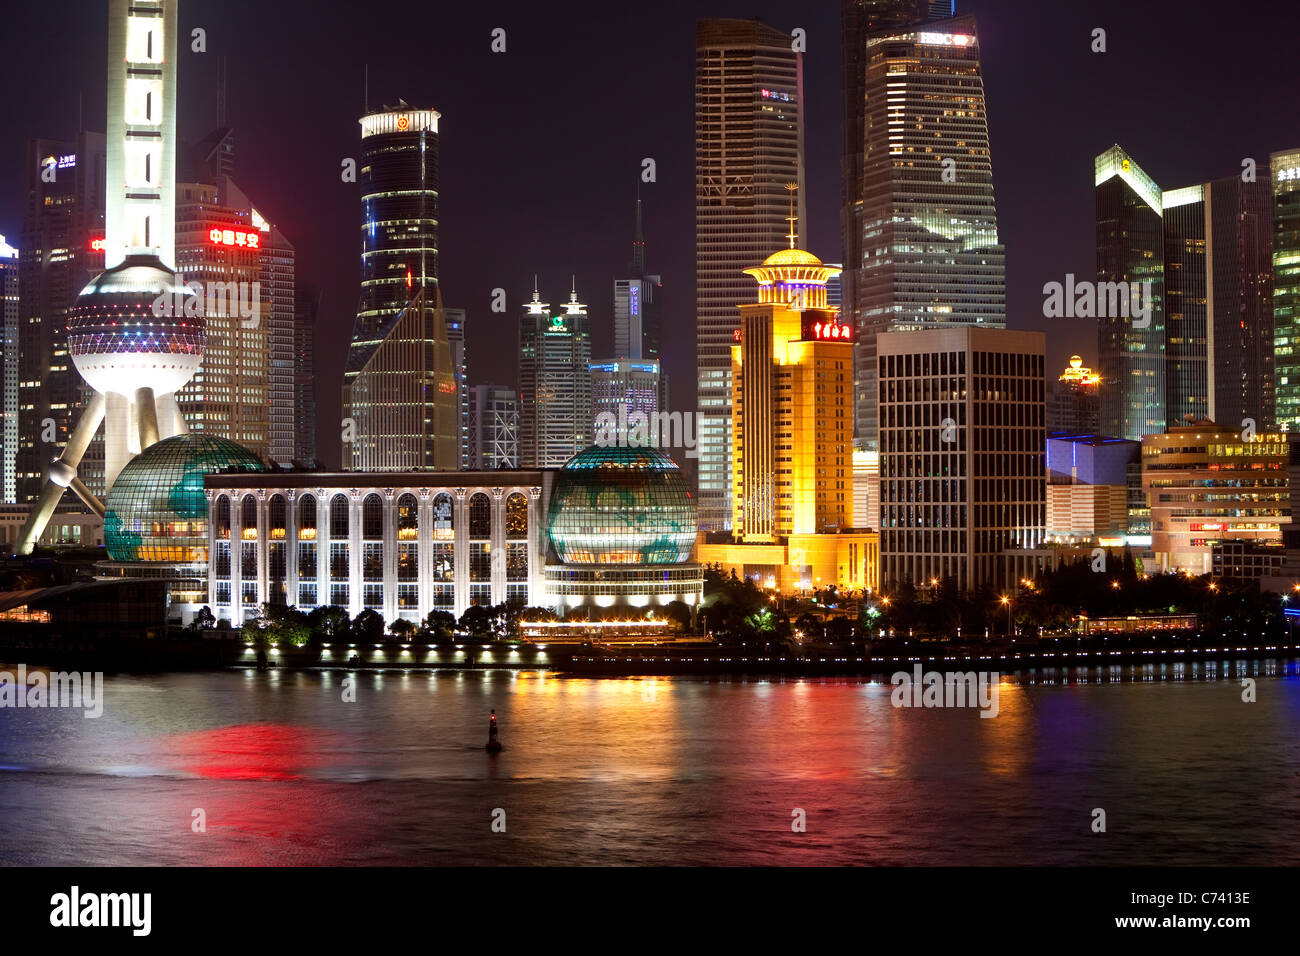 New Pudong skyline; looking across the Huangpu River from the Bund; Shanghai; China Stock Photo